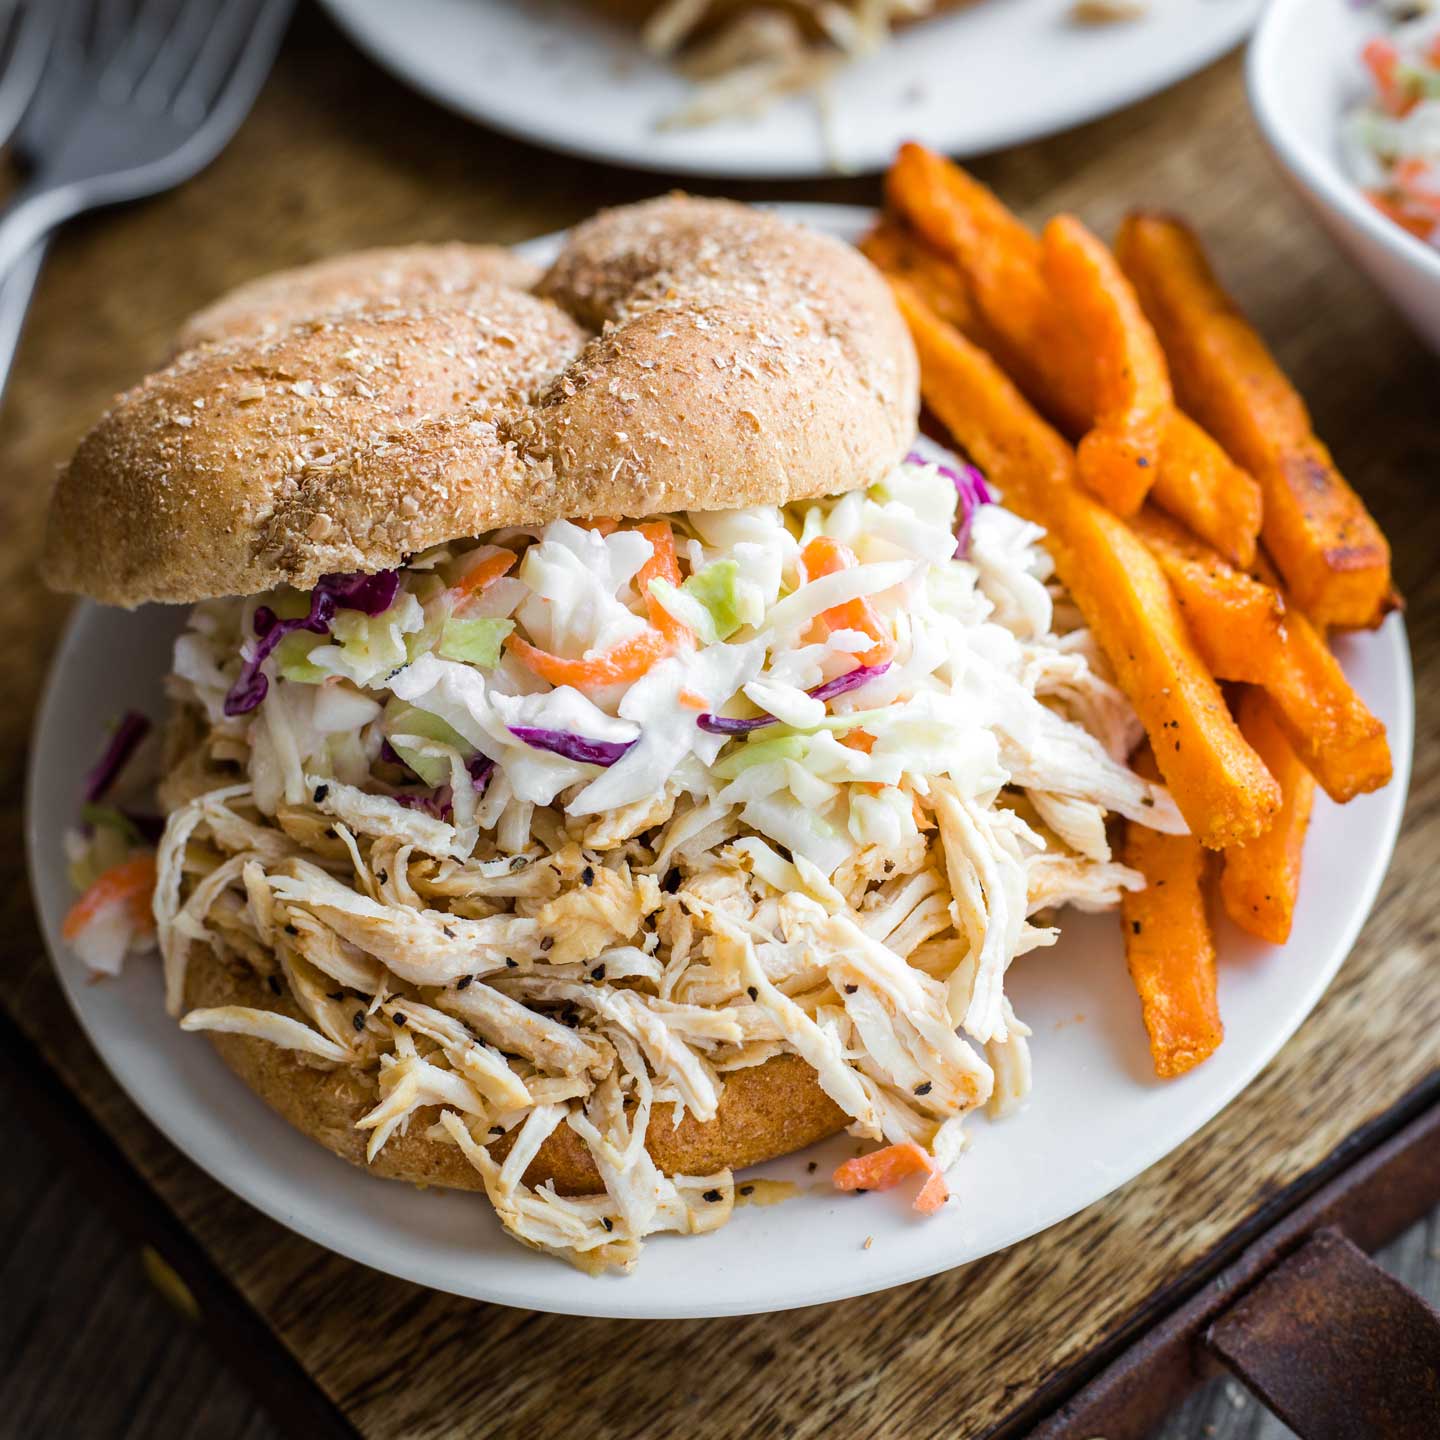 Just 5 ingredients and 5 minutes of prep! These crazy-delicious, super-EASY Carolina-Style Instant Pot Shredded BBQ Chicken Sandwiches are so simple in your pressure cooker! Tender shredded chicken is accented with a bold, savory sauce, piled high on pillowy, soft buns! A true reader favorite – try it and see why! | Instant pot recipes easy | instant pot chicken recipes | pressure cooker recipes | pressure cooker chicken | chicken recipes | shredded chicken recipes | www.TwoHealthyKitchens.com